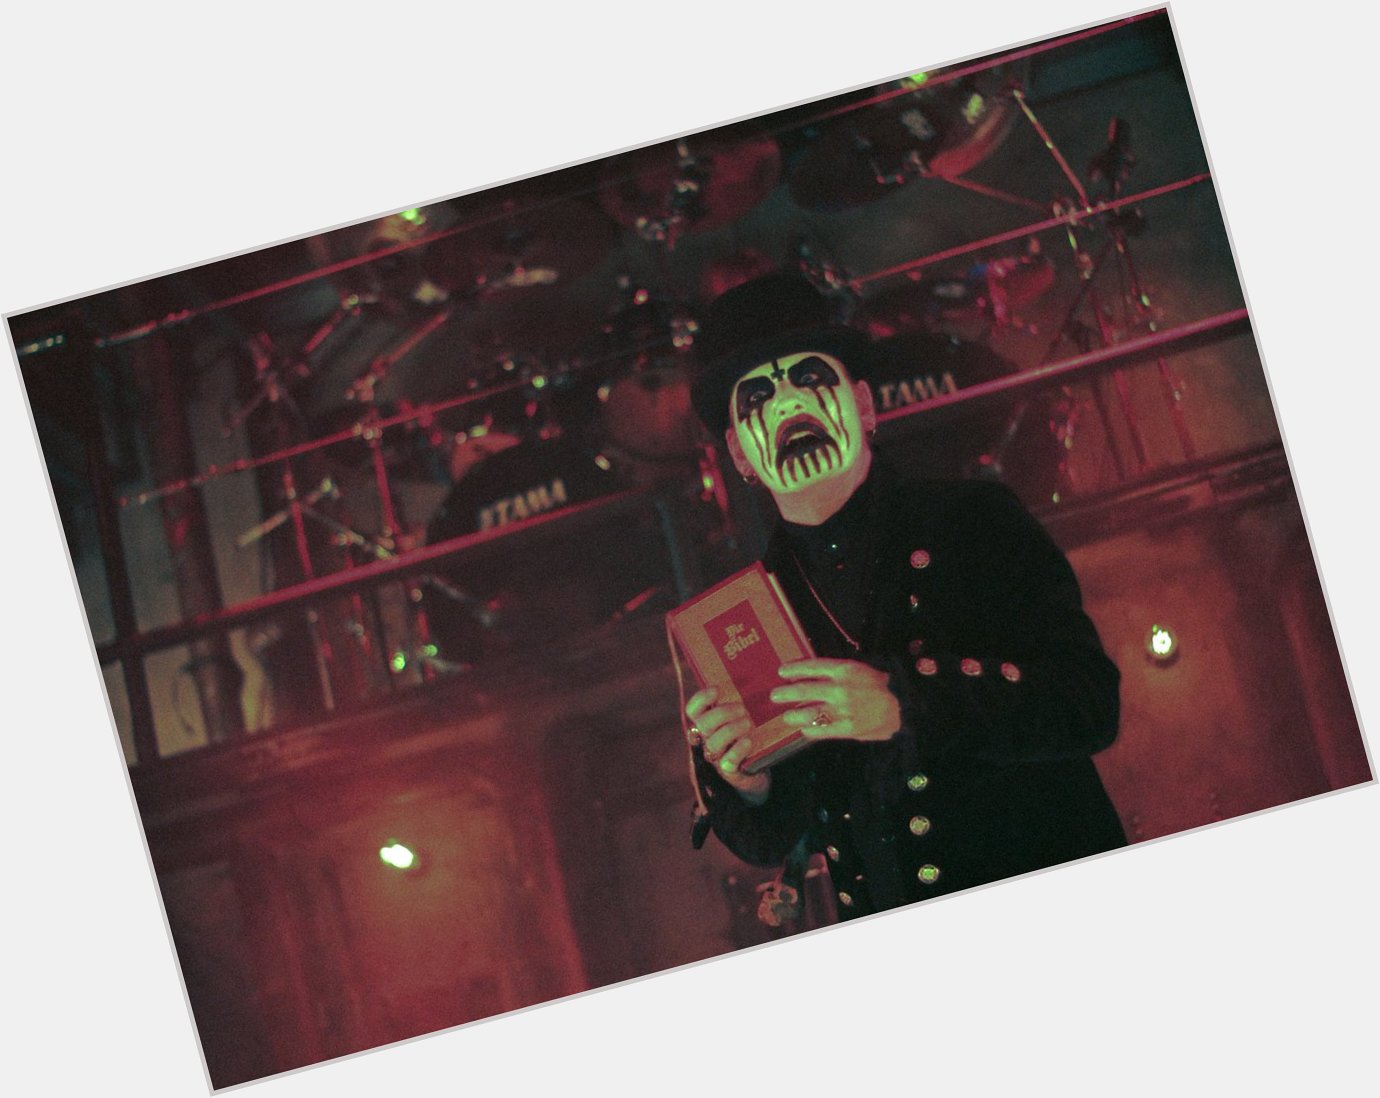 Happy Birthday to the King of Kings, Mr. King Diamond. by Heaviest of Art 